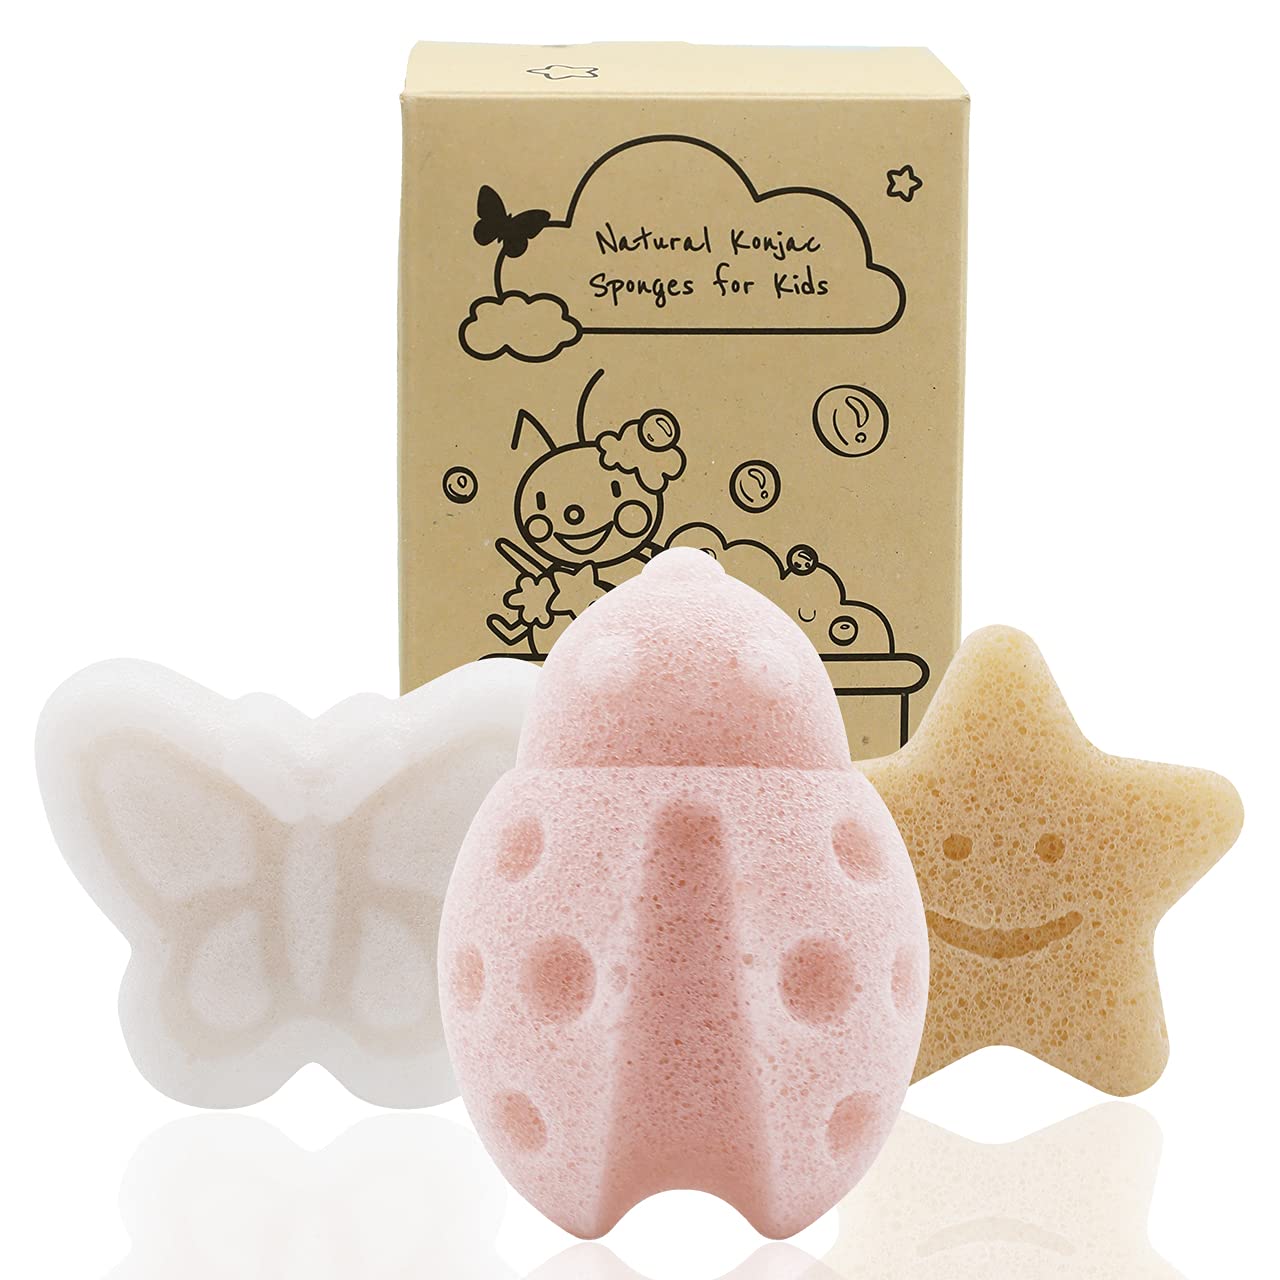 myHomeBody Konjac Baby Sponge for Bathing, Cute Shapes Natural Kids Bath Sponges for Infants, Toddler Bath Time, Natural and Safe Plant-Based Konjac Baby Bath Toys, 3pc. Set: Butterfly, Ladybug, Star